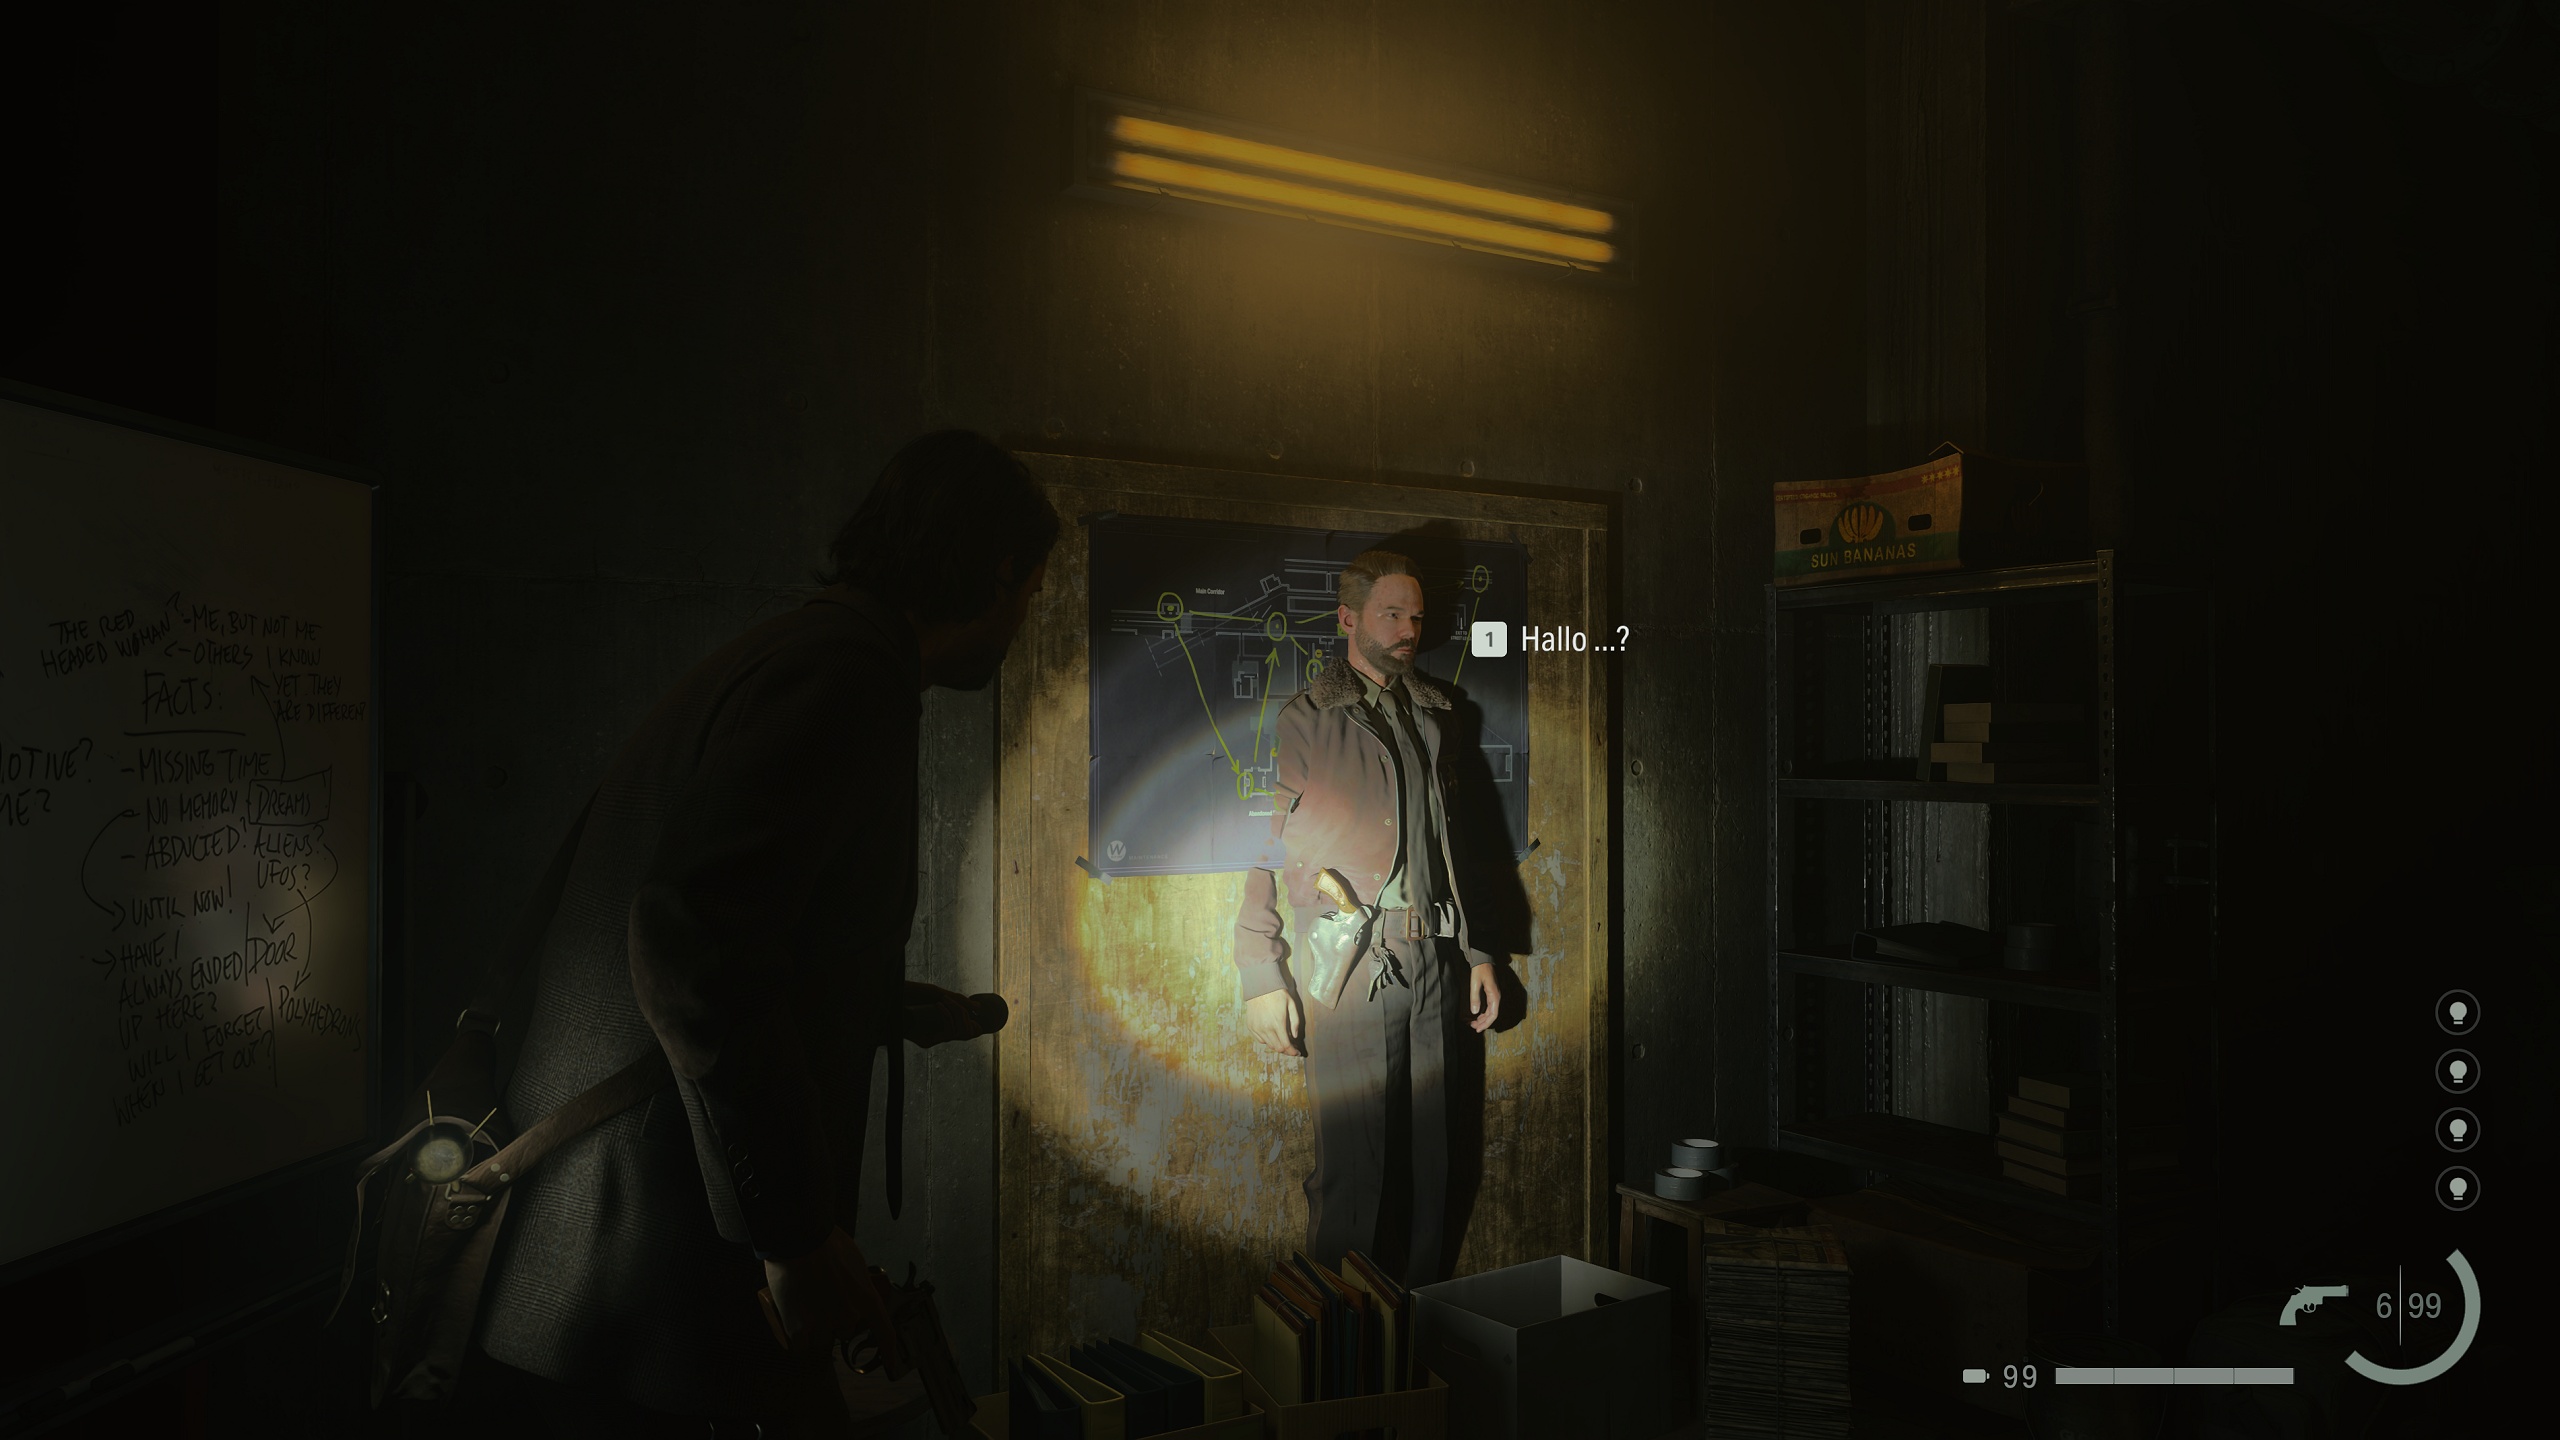 Alan Wake 2: What to know if you haven't played the original game